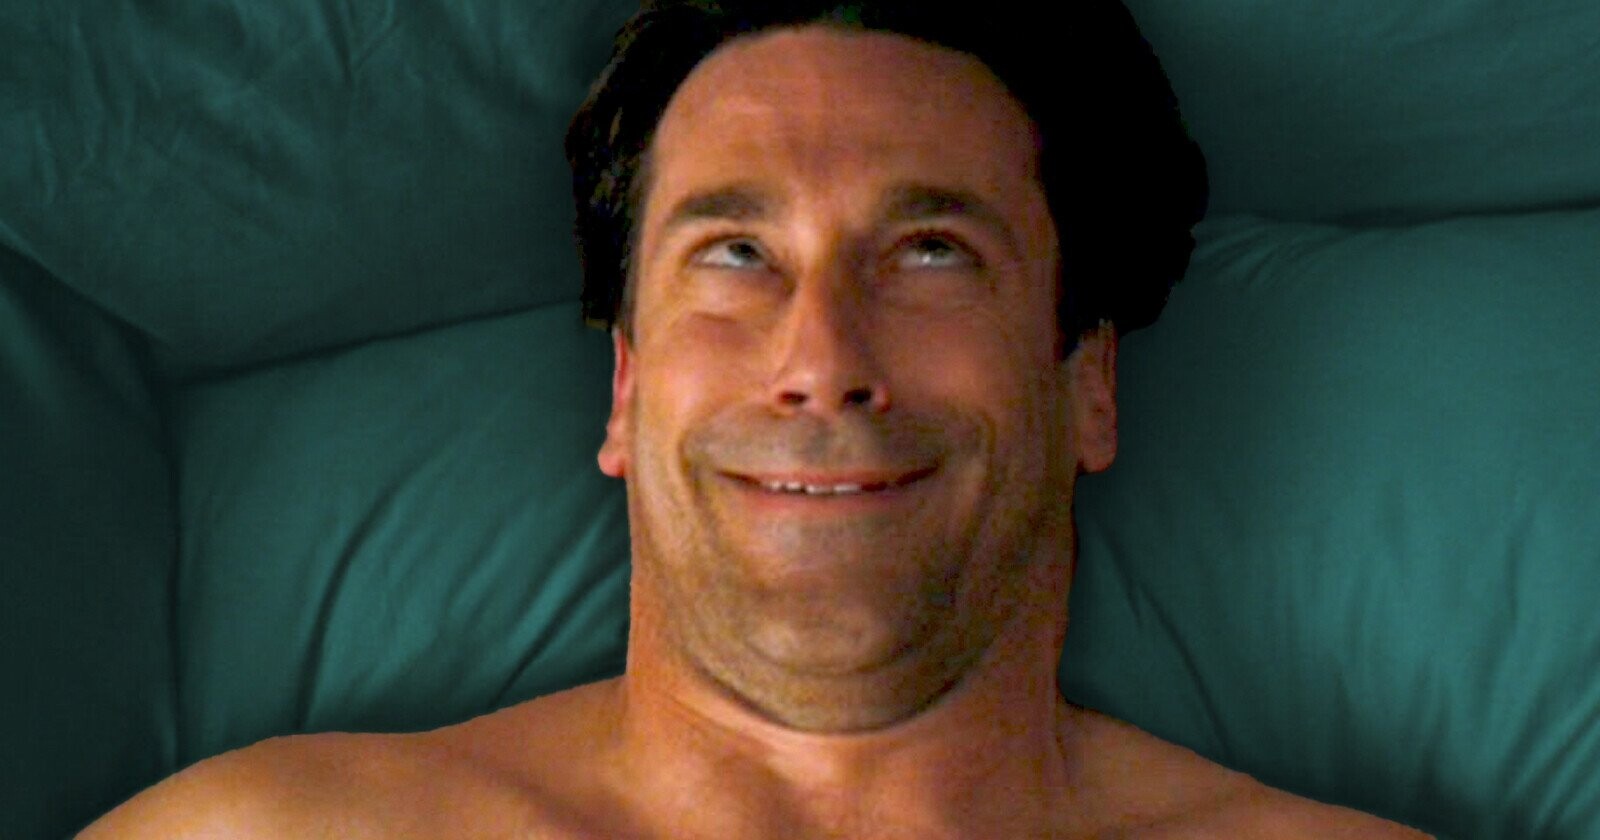 52 of the Most Hilarious Jon Hamm Moments on His 52nd Birthday